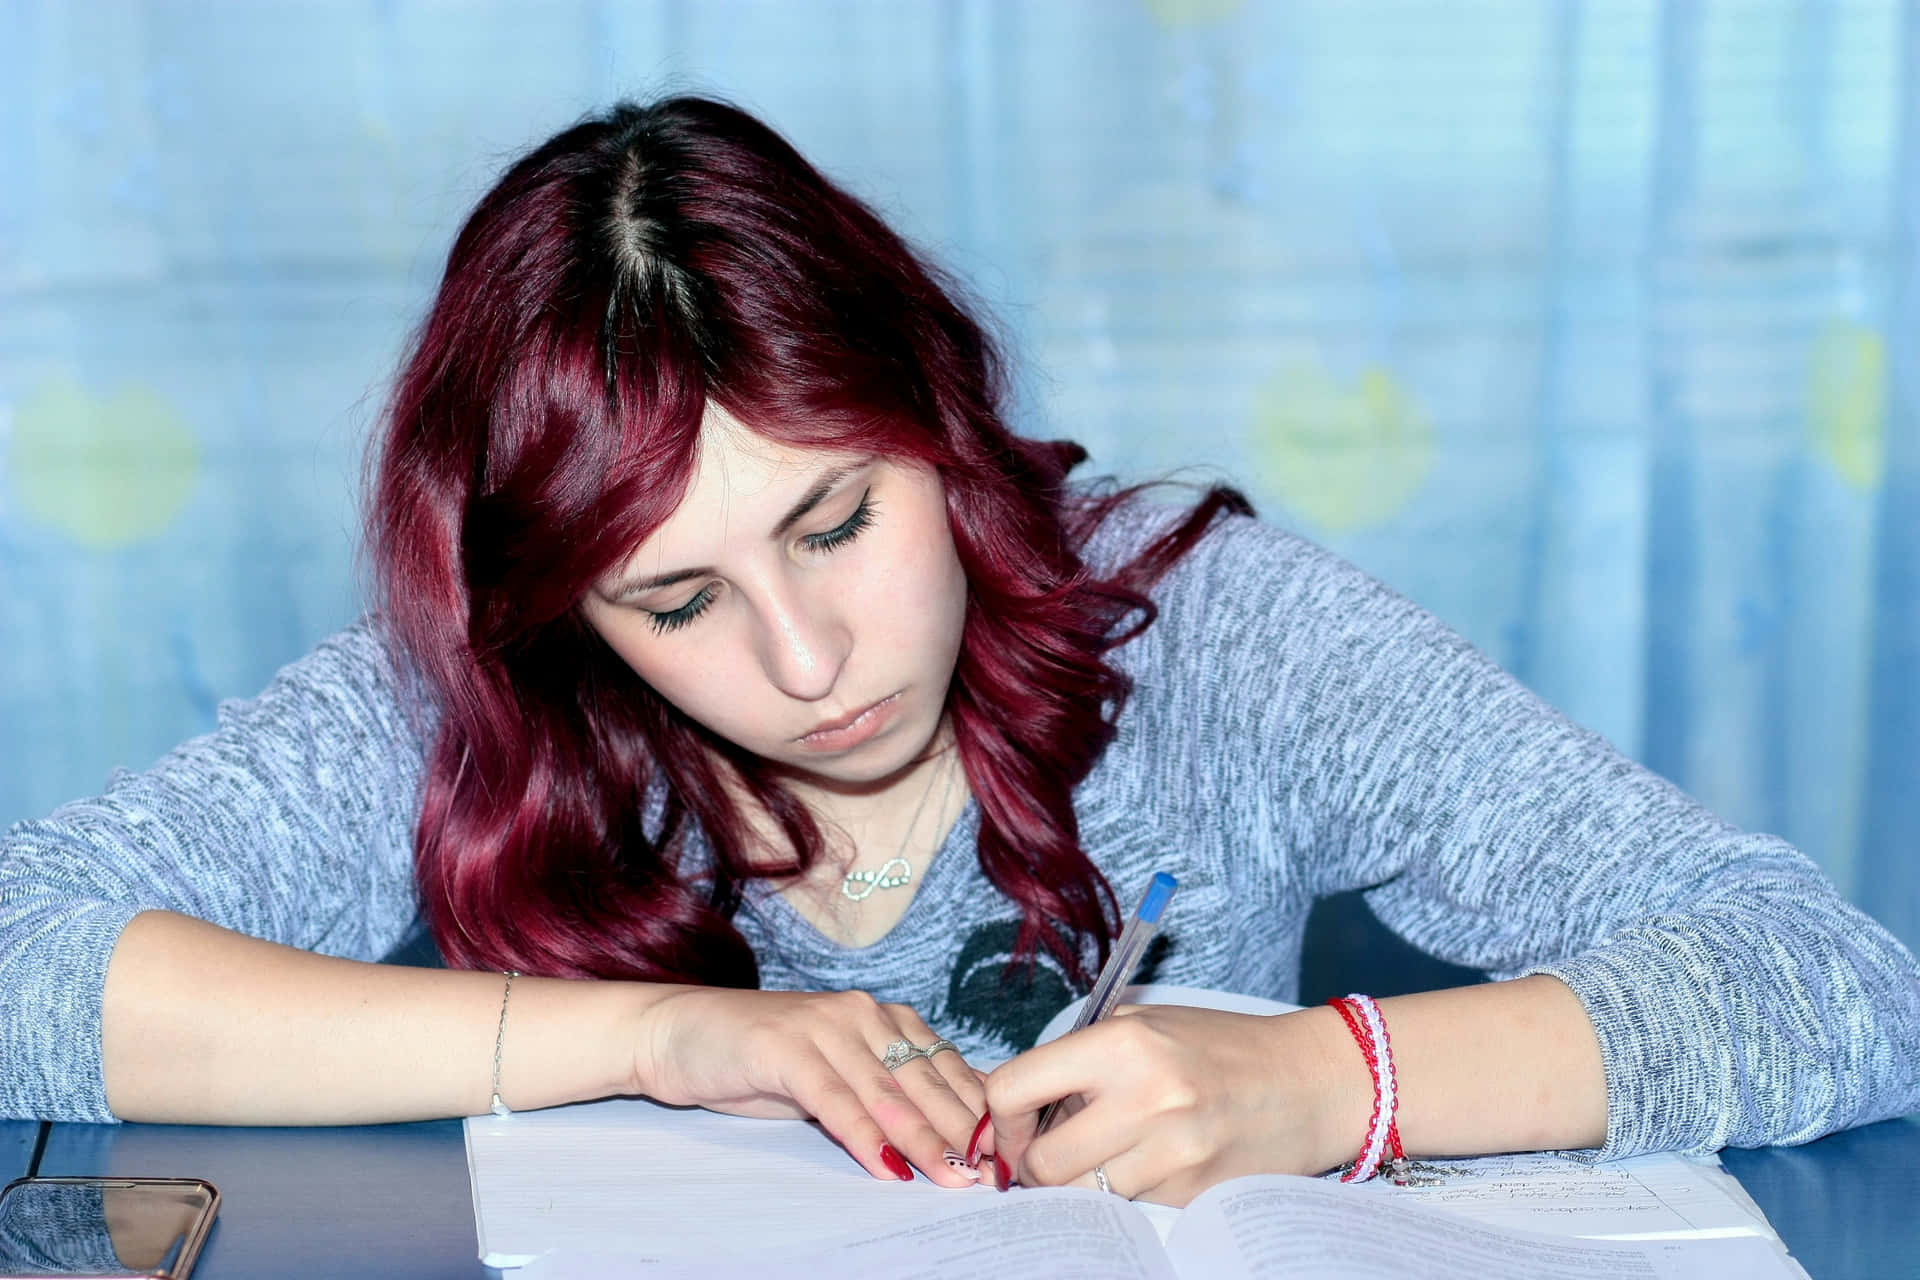 A Girl Is Writing On A Piece Of Paper